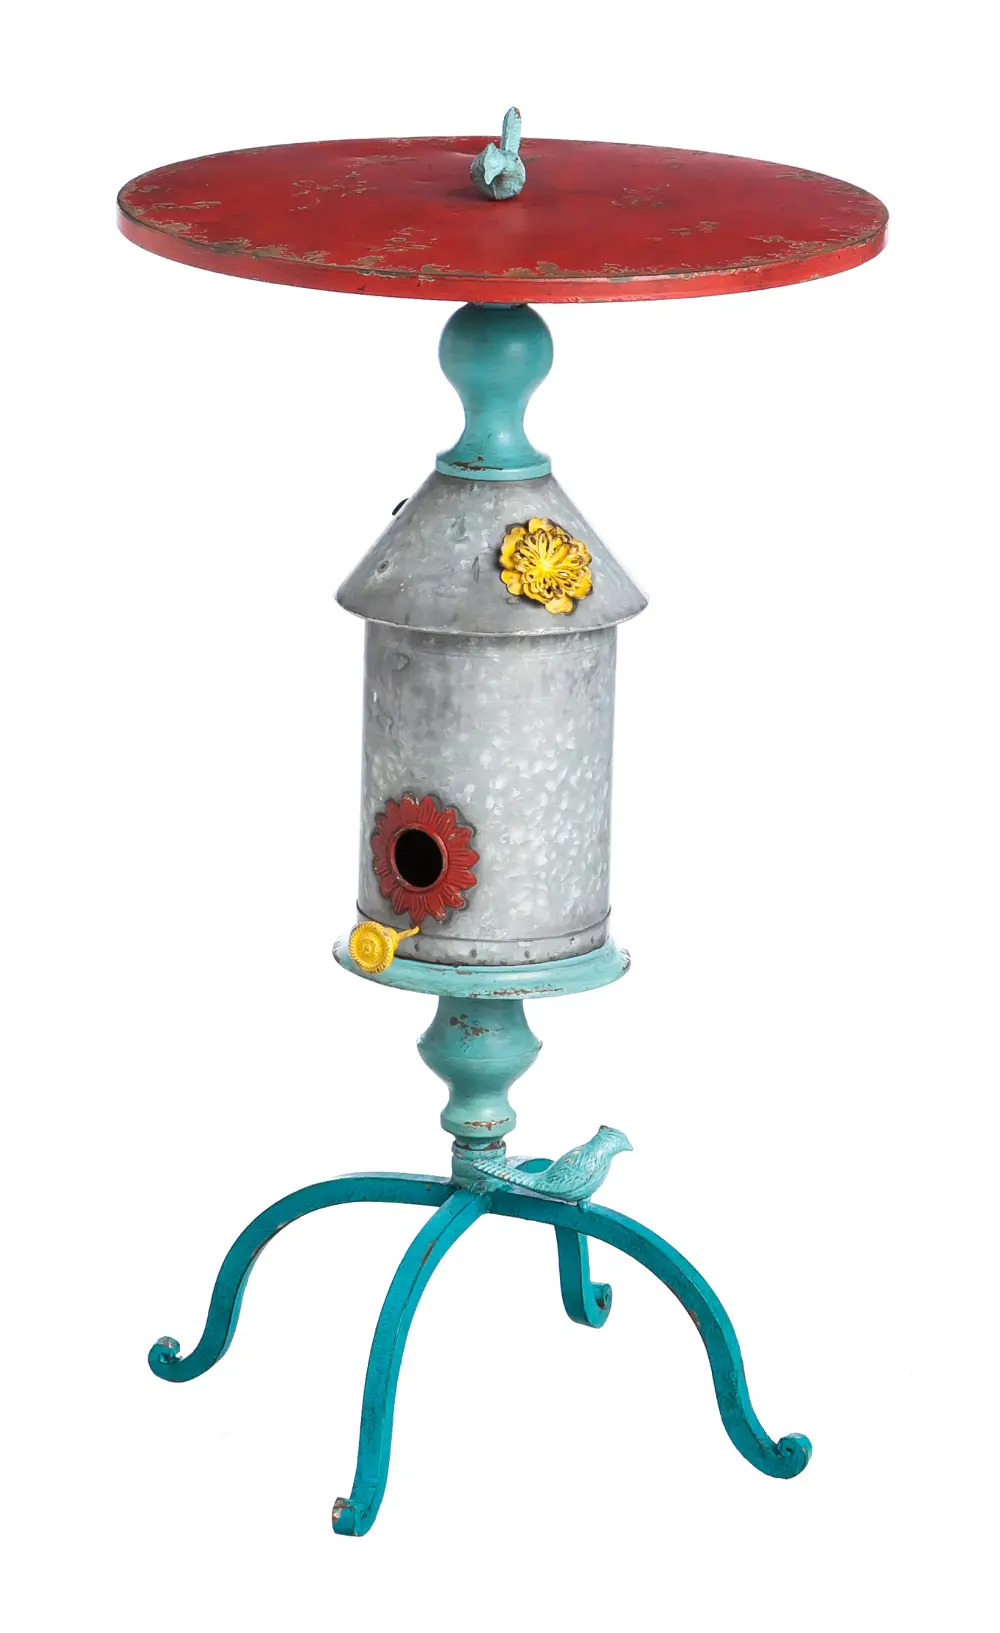 Distressed Multi-Colored Metal Birdhouse Table with Cast Iron Birds-1